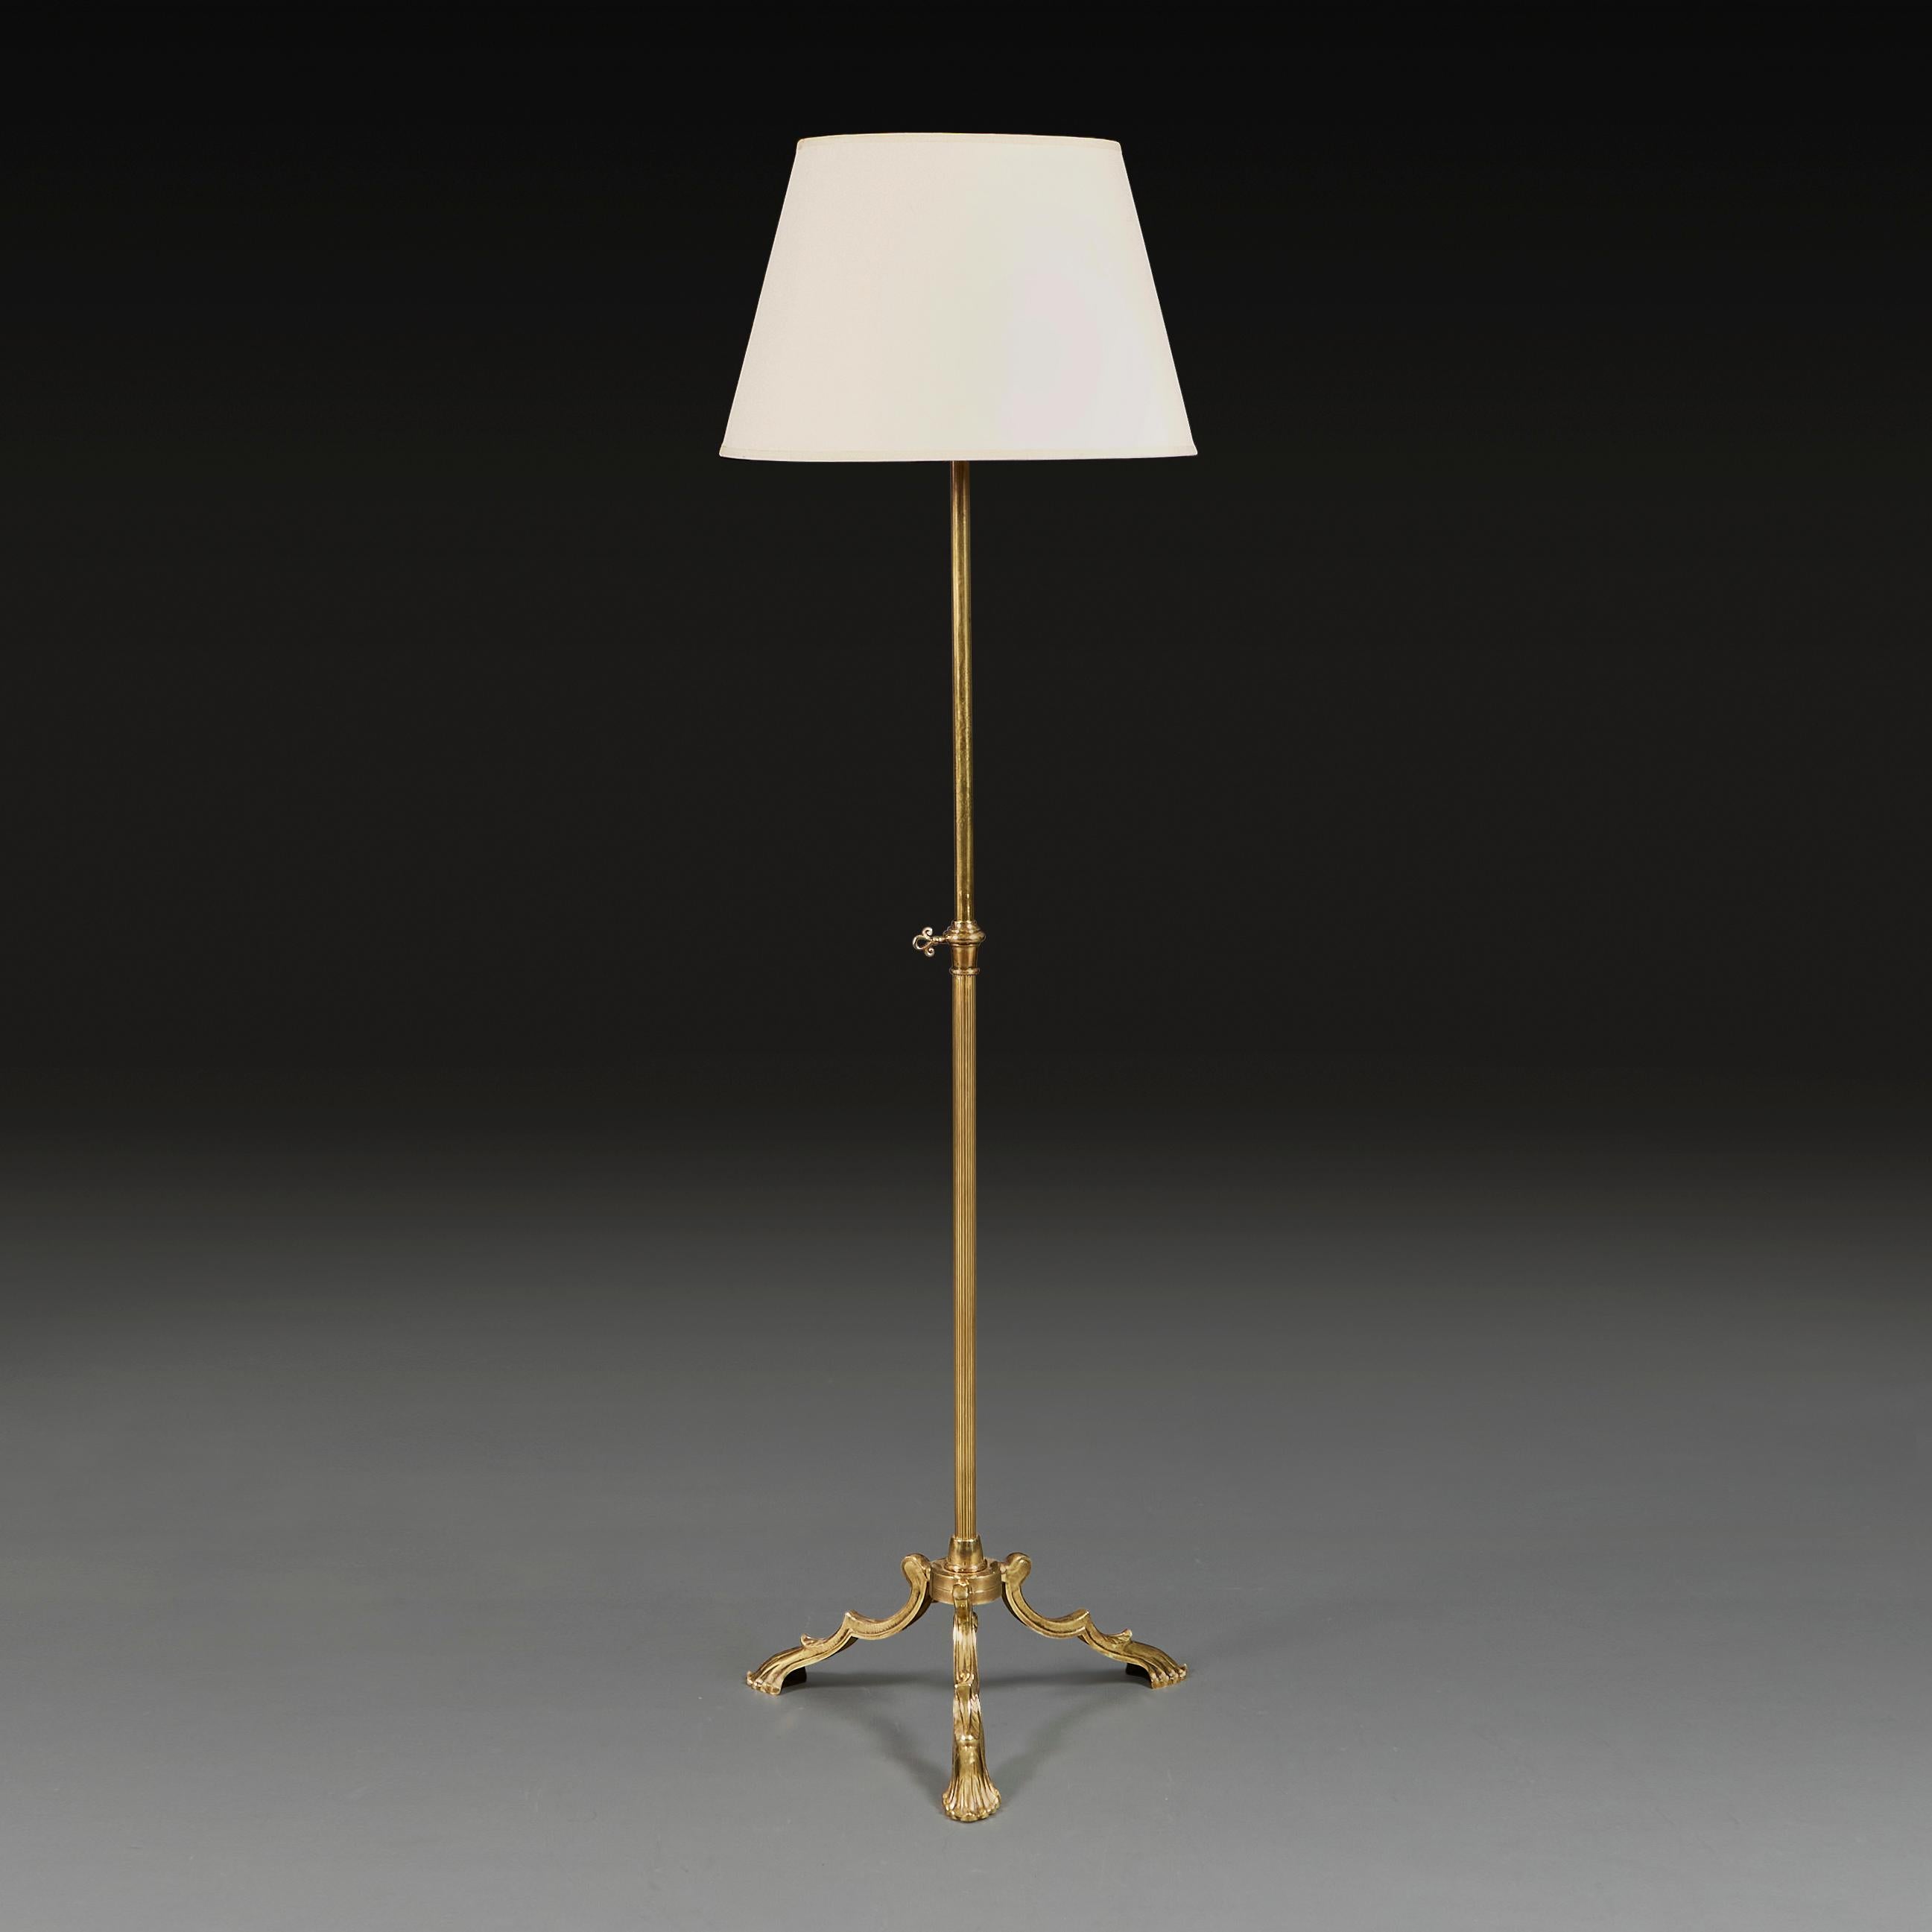 England, circa 1910 

An early 20th century Edwardian brass standard lamp with a reeded telescopic stem surmounted on a tripod base with stylised anthemion feet and inverted pine finial. 

Height 142.00cm 
Diameter 44.00cm 

Please note: This is